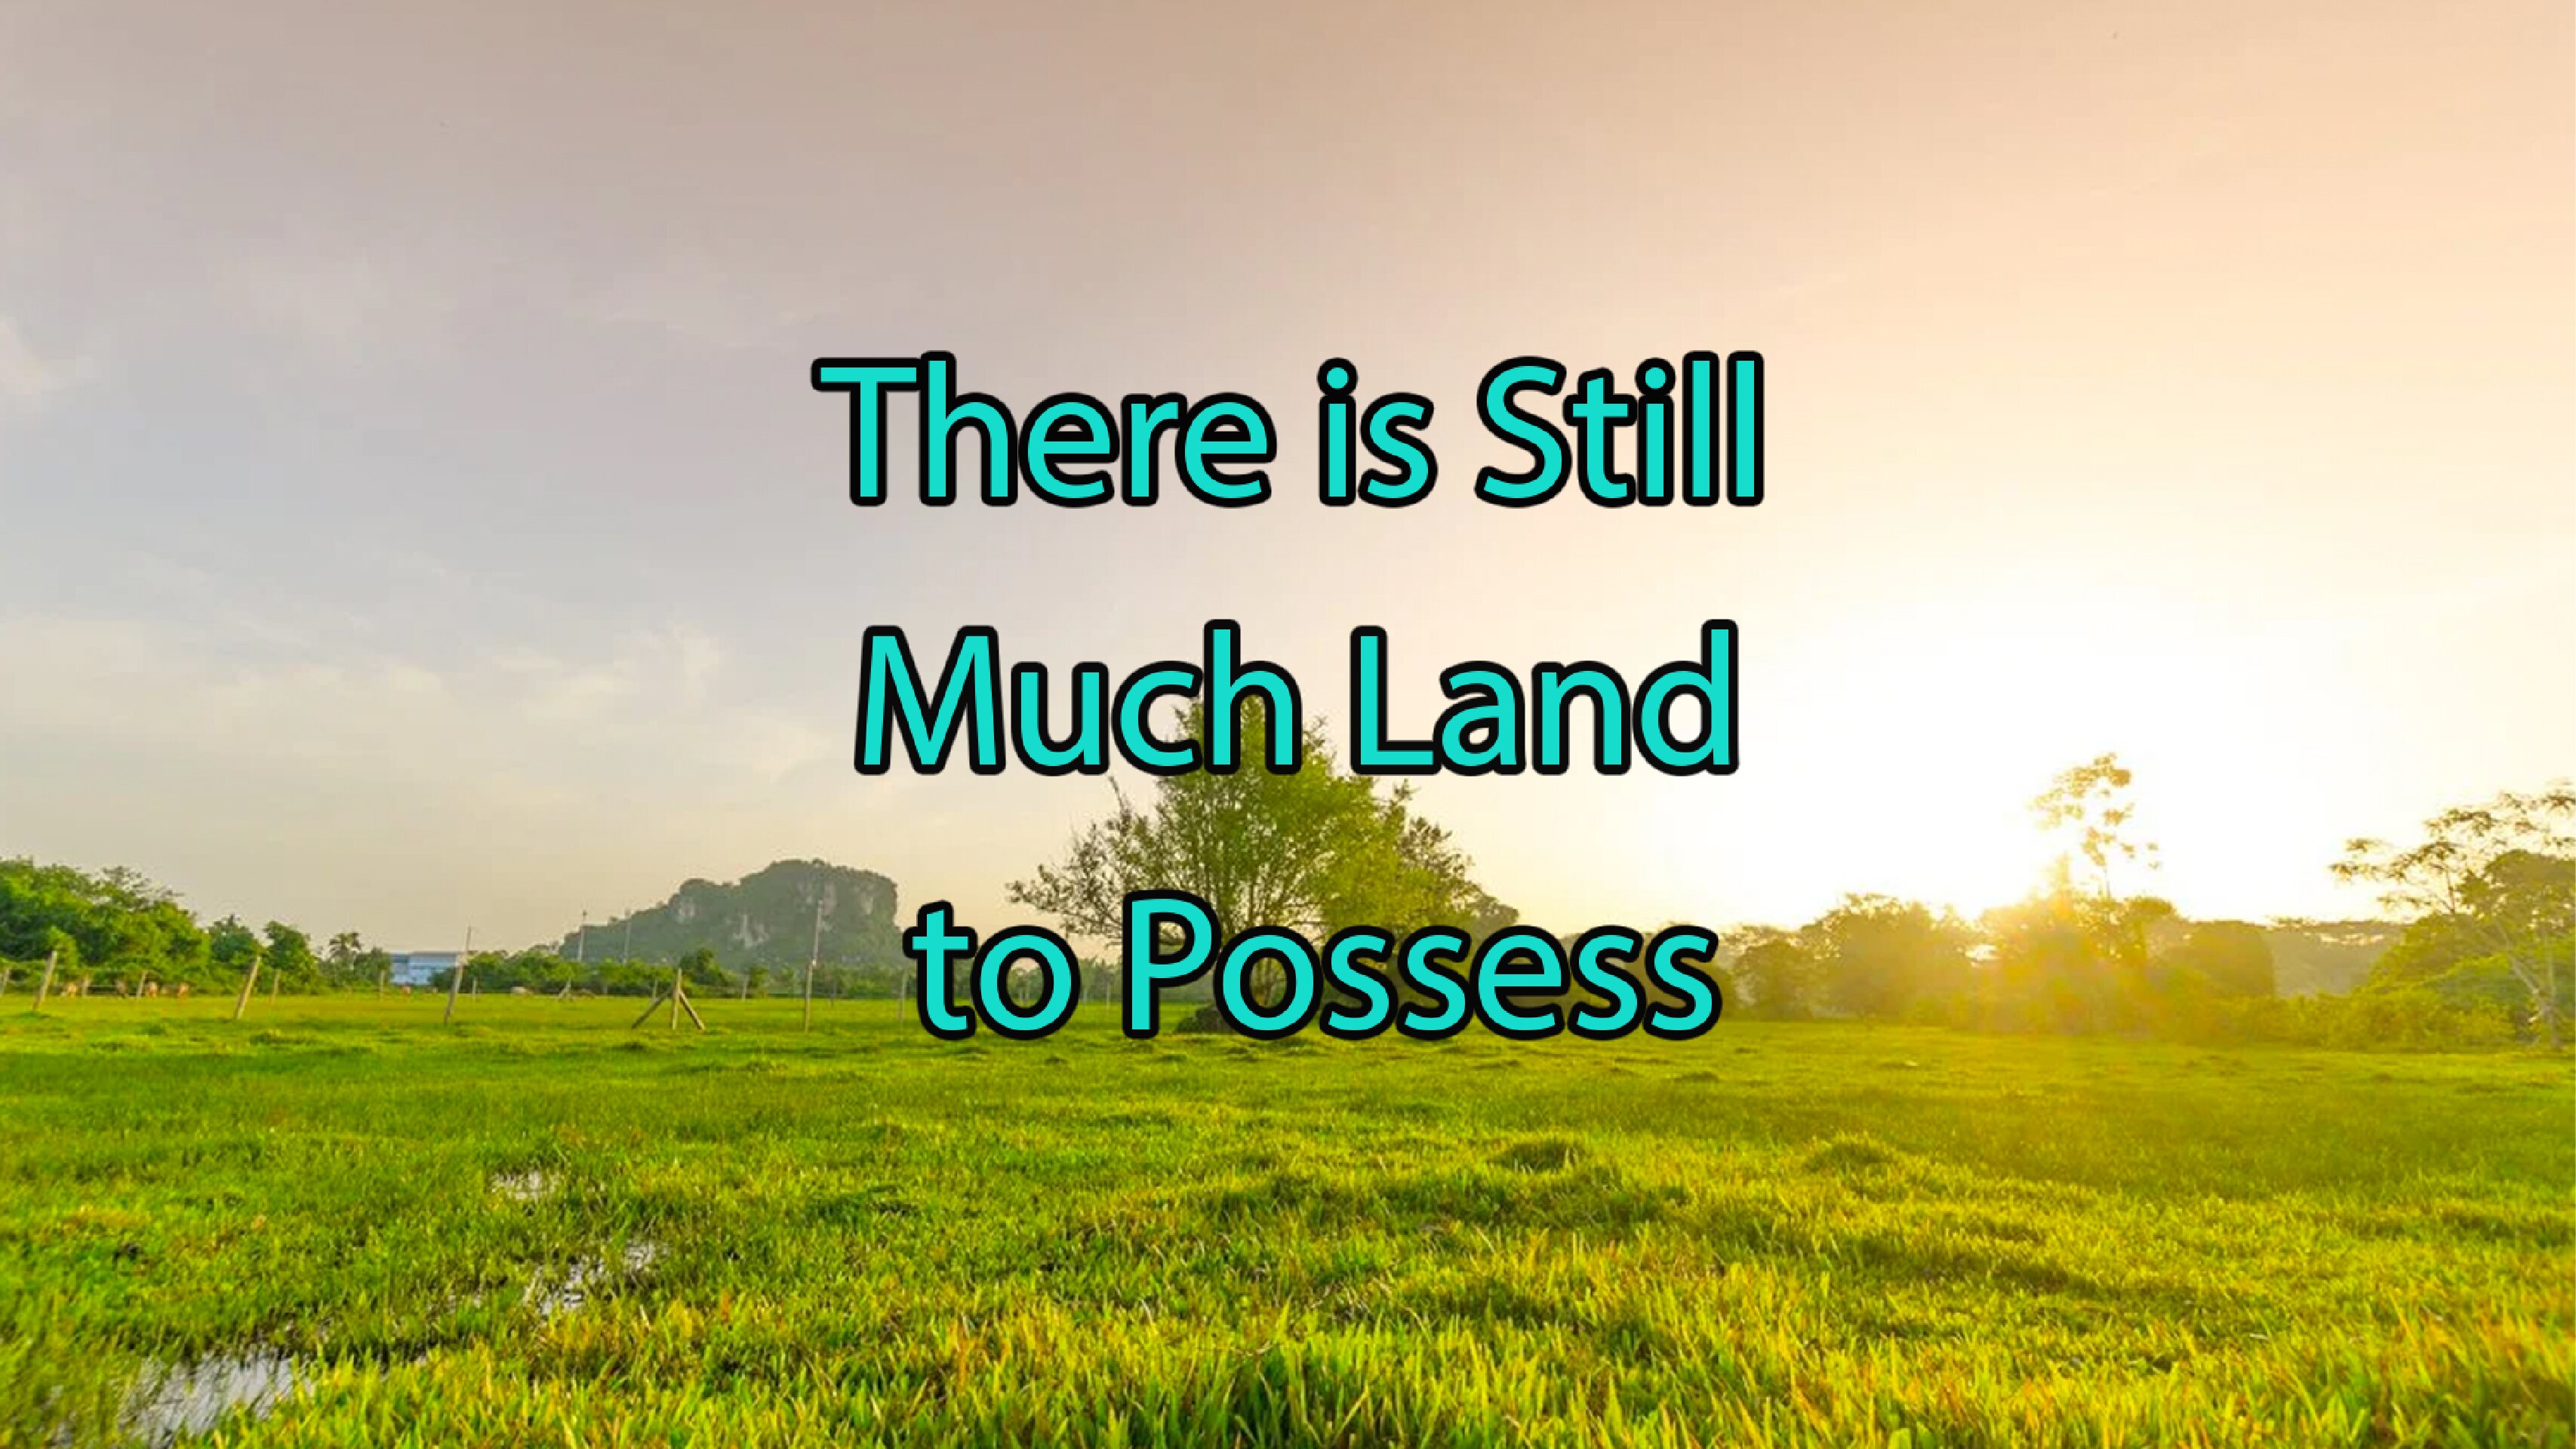 Theres is Still Much Land to Possess